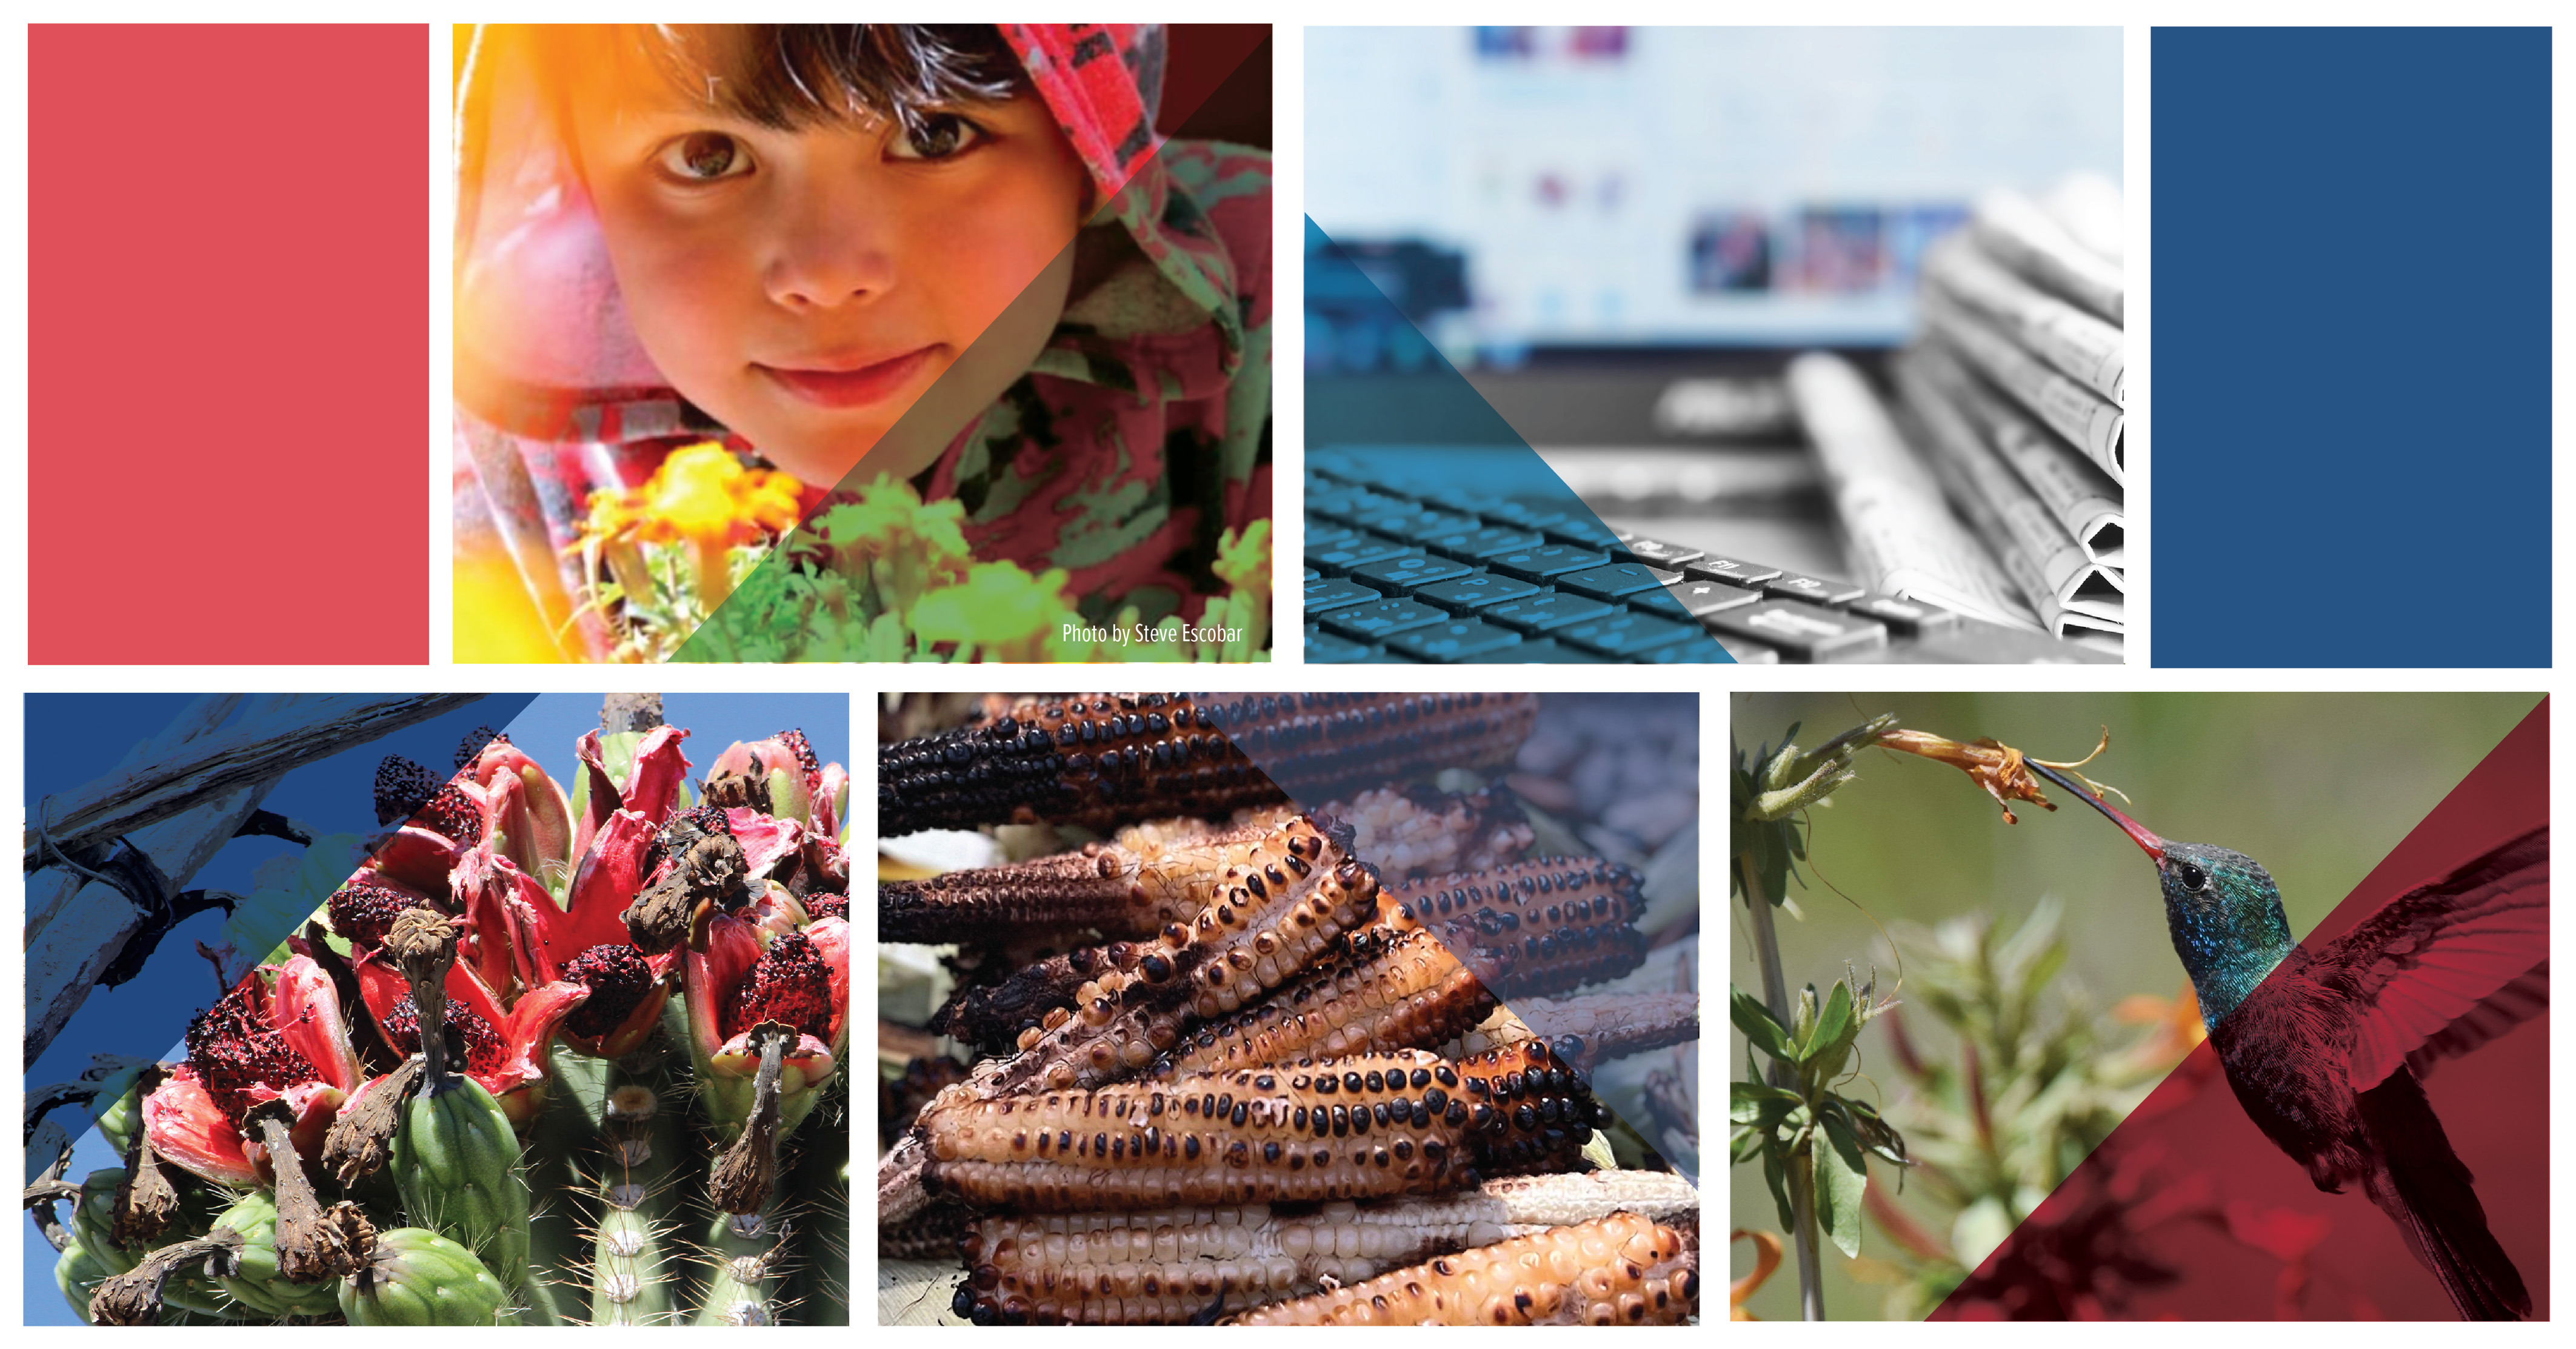 A collage of images including a child holding a desert flower, a newspaper stack, a blooming cactus, cooked corn, and a hummingbird eating from a desert flower.